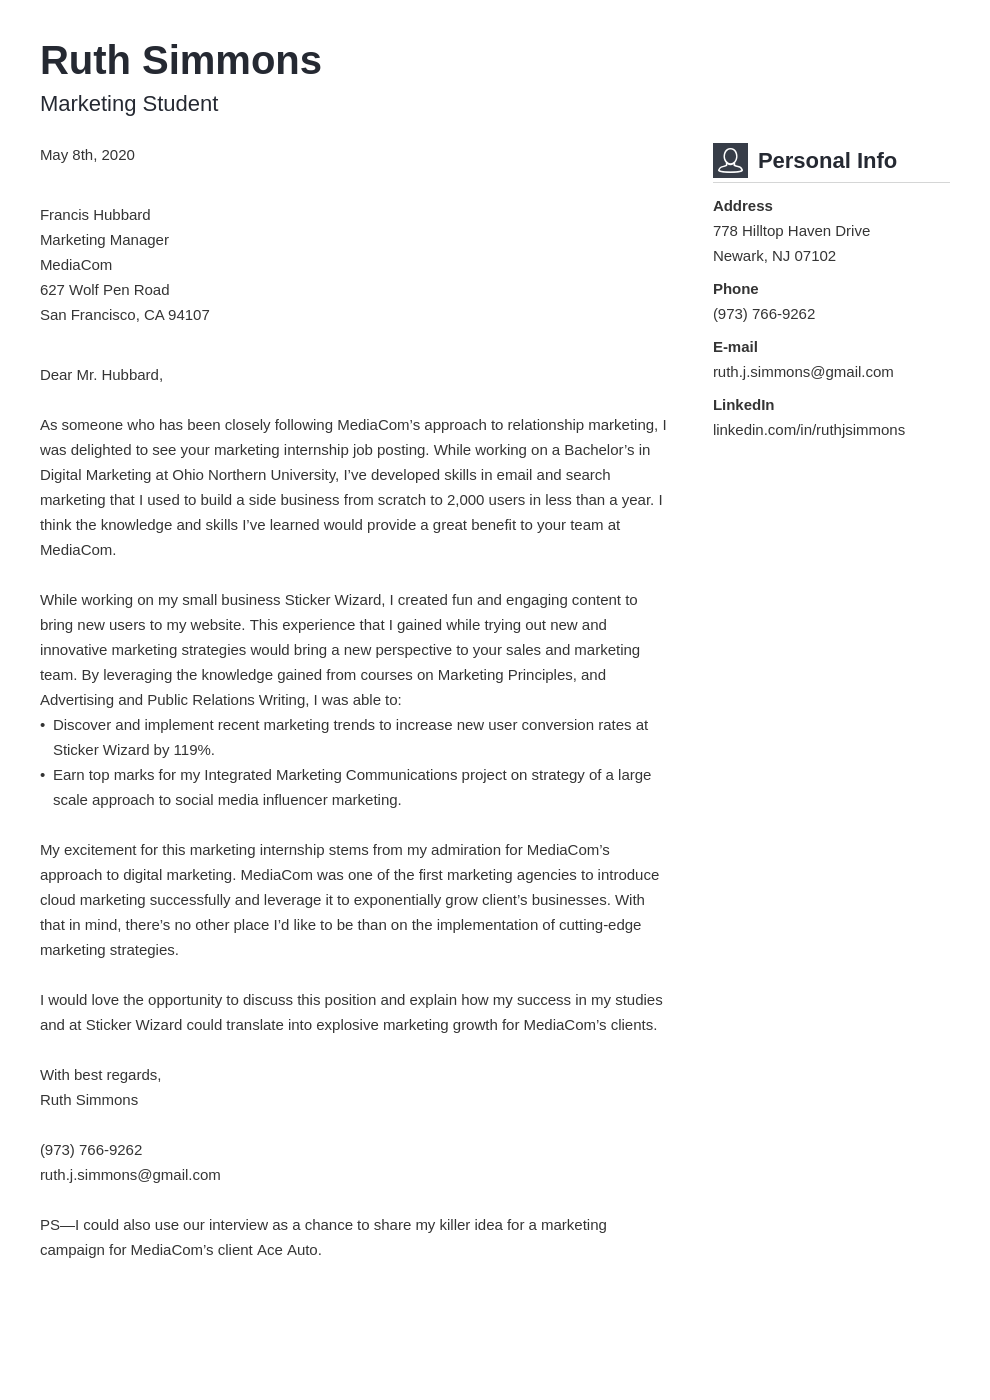 marketing work experience cover letter